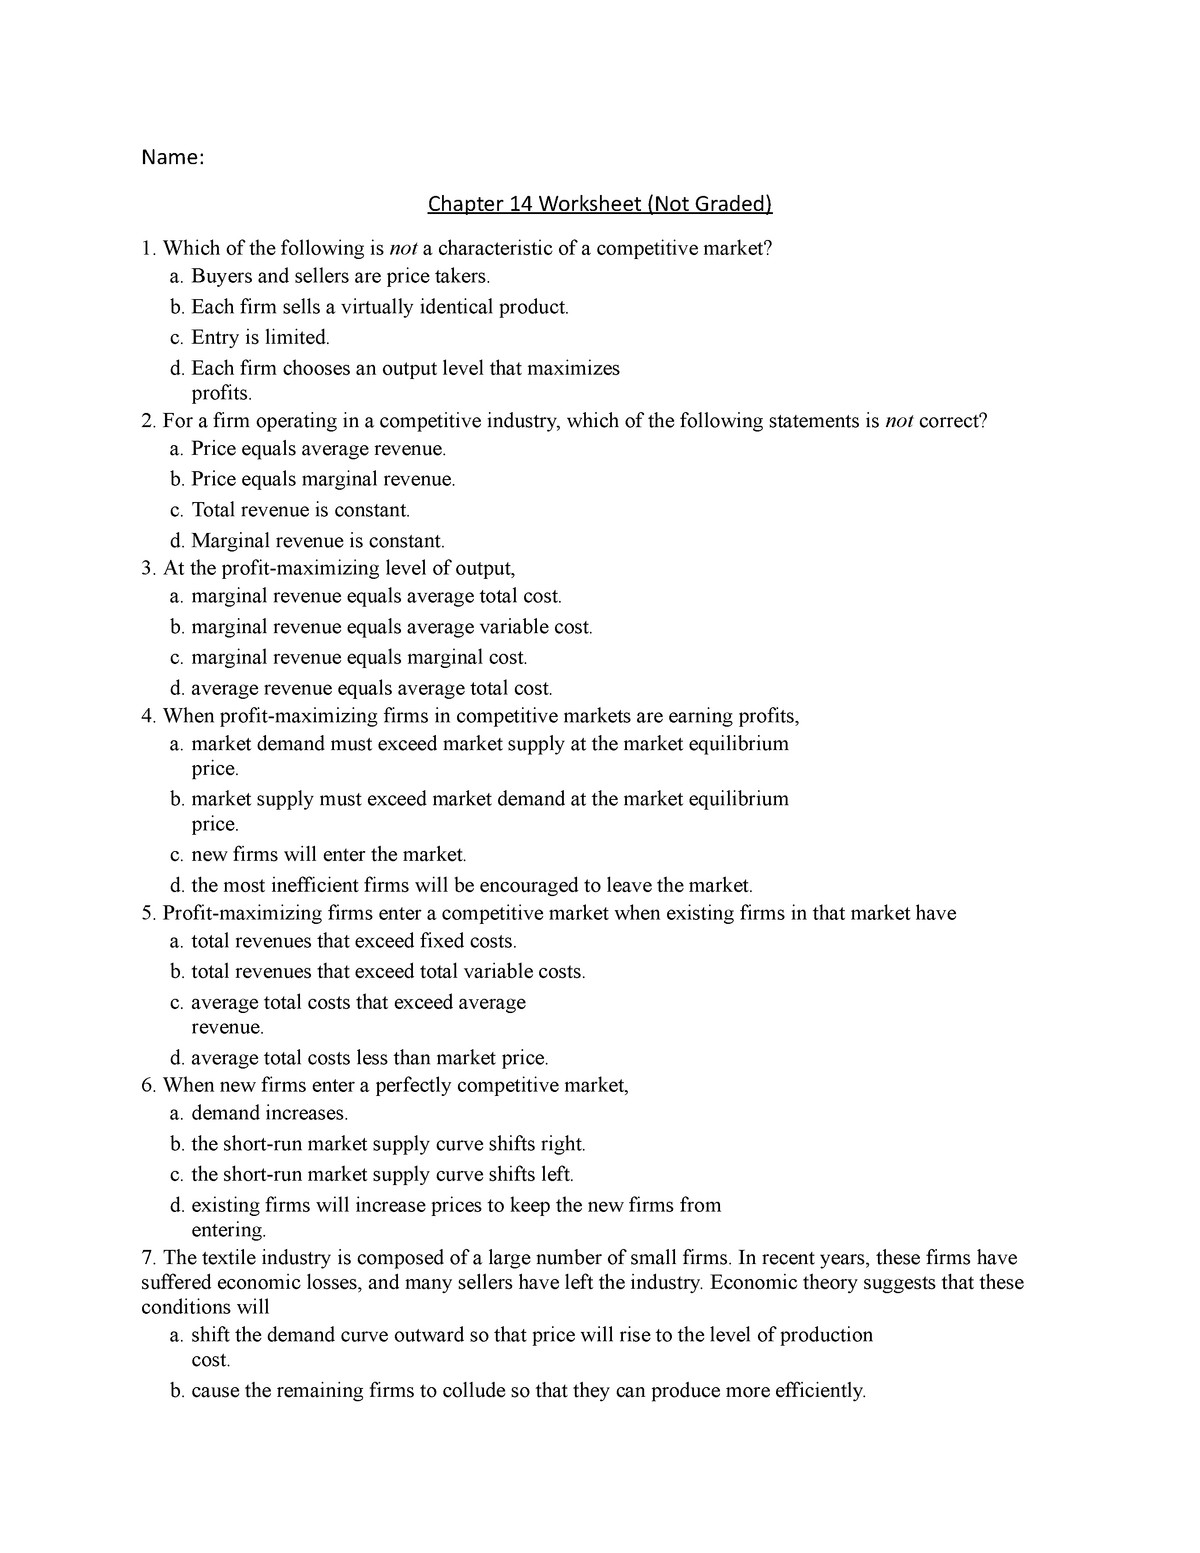 chapter-14-worksheet-not-graded-name-chapter-14-worksheet-not-graded-1-which-of-the